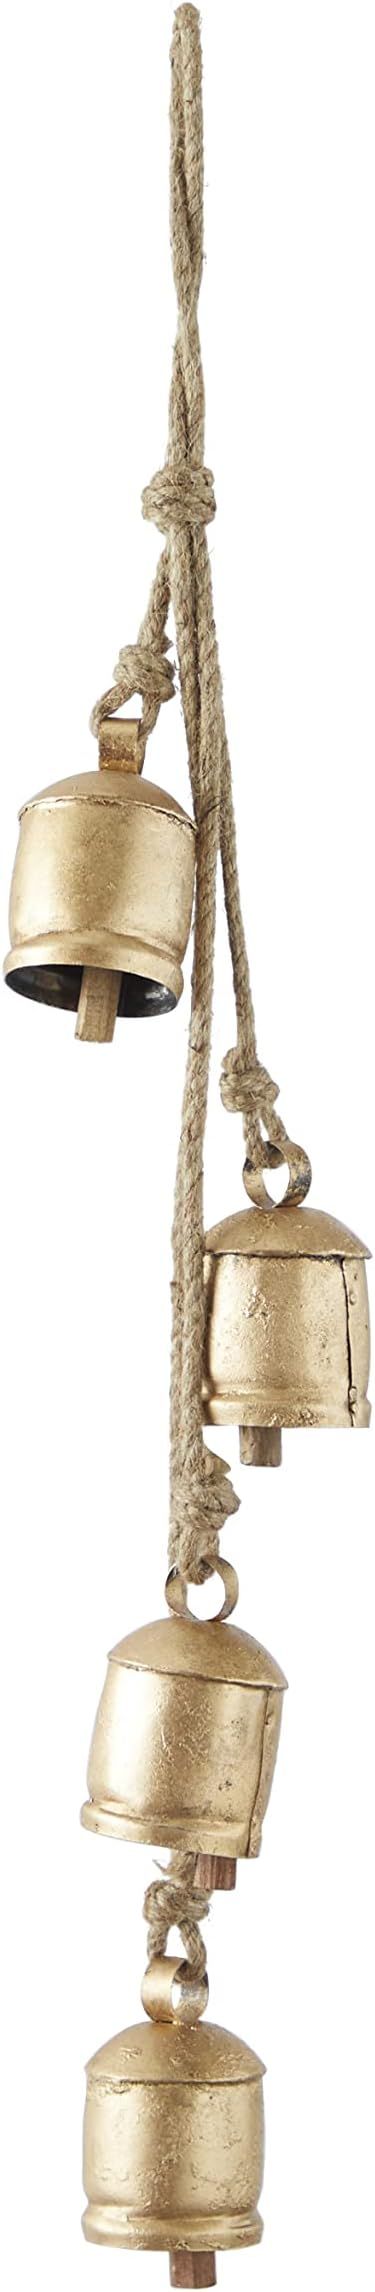 Deco 79 Metal Decorative Cow Bell with Jute Hanging Rope, 4" x 3" x 30", Gold | Amazon (US)